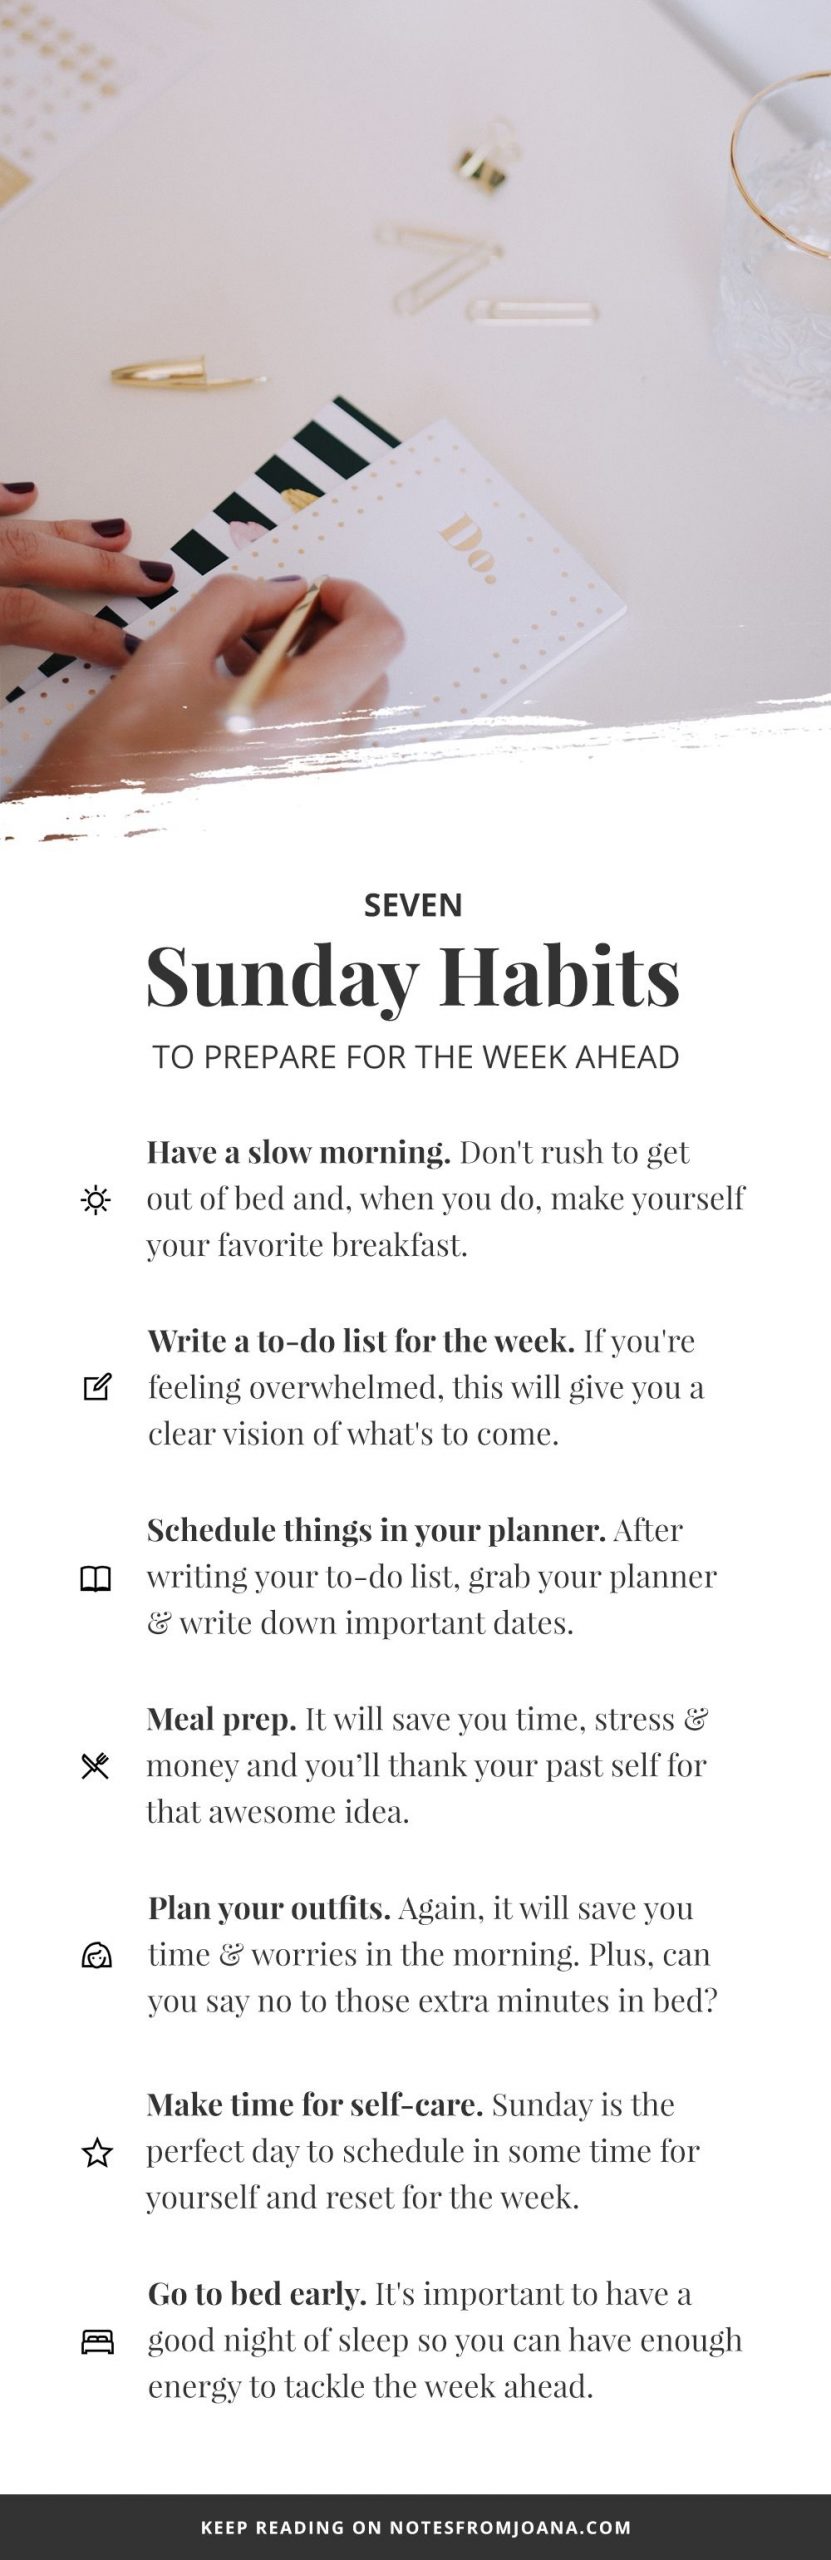 7 sunday habits to prepare you for the week ahead